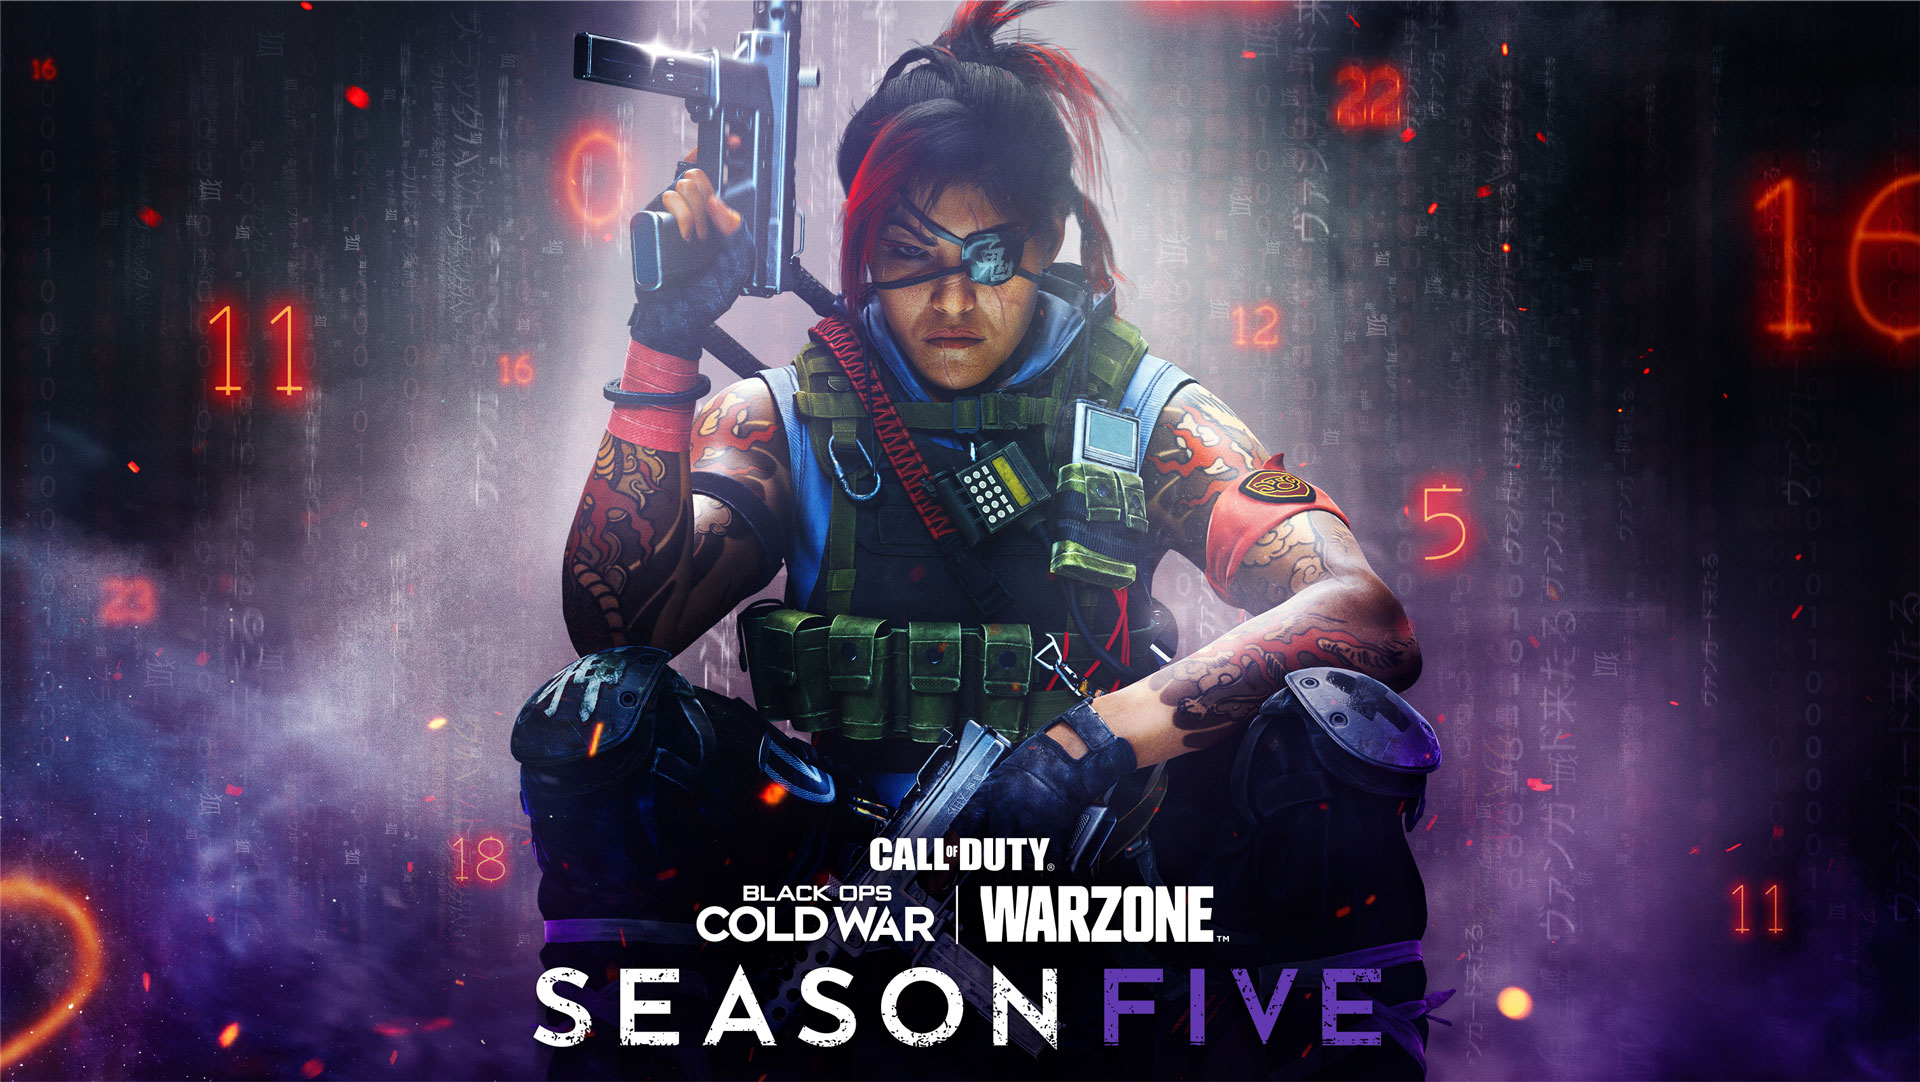 Season 5 Brings Among Us-like Game Mode Double Agent to Black Ops Cold War, More Additions on the Roadmap